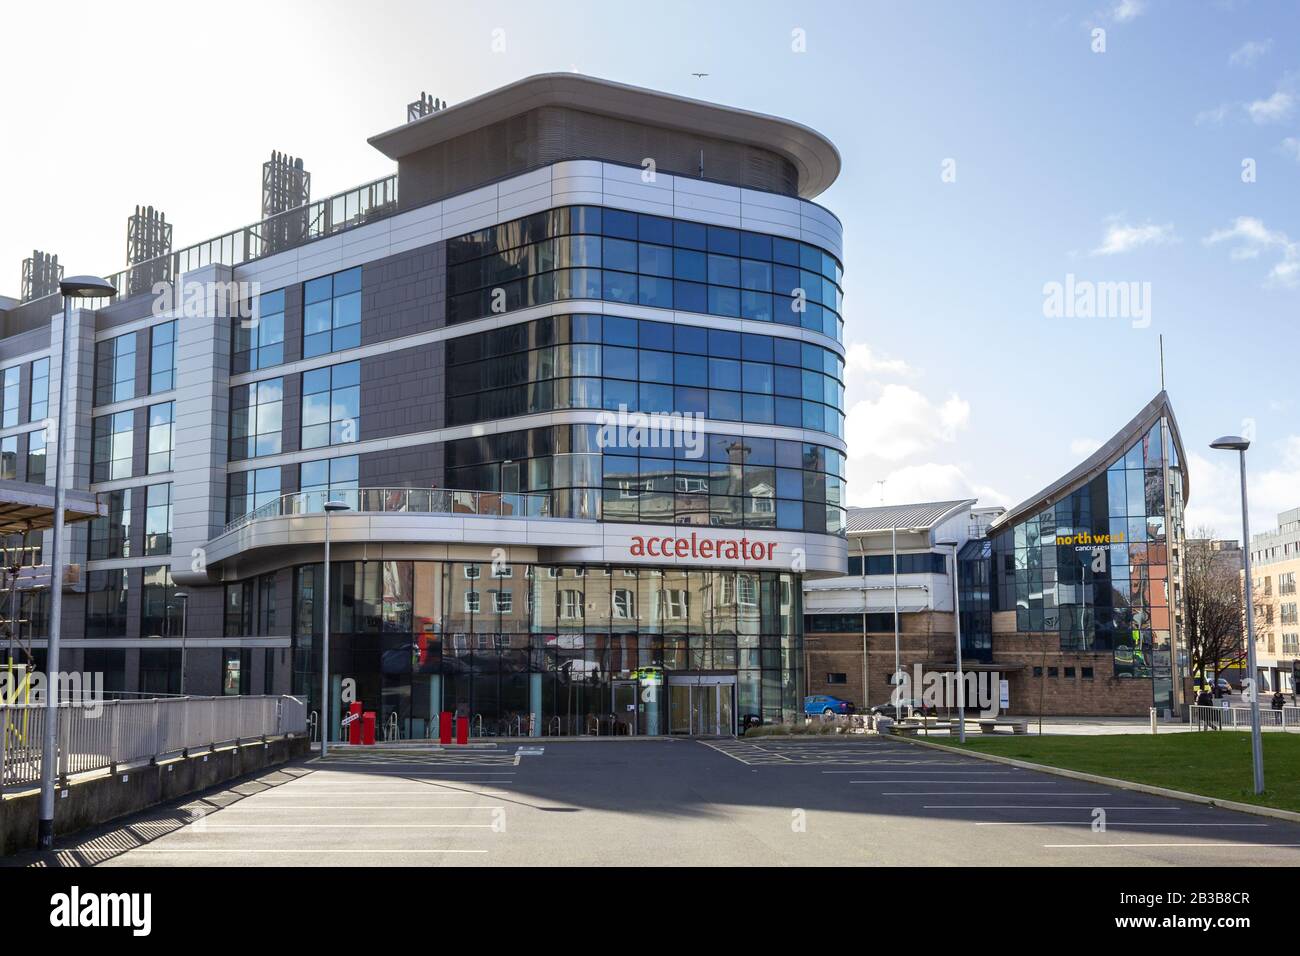 Accelerator Life Science Research Institute, Daulby Street, Liverpool Foto Stock